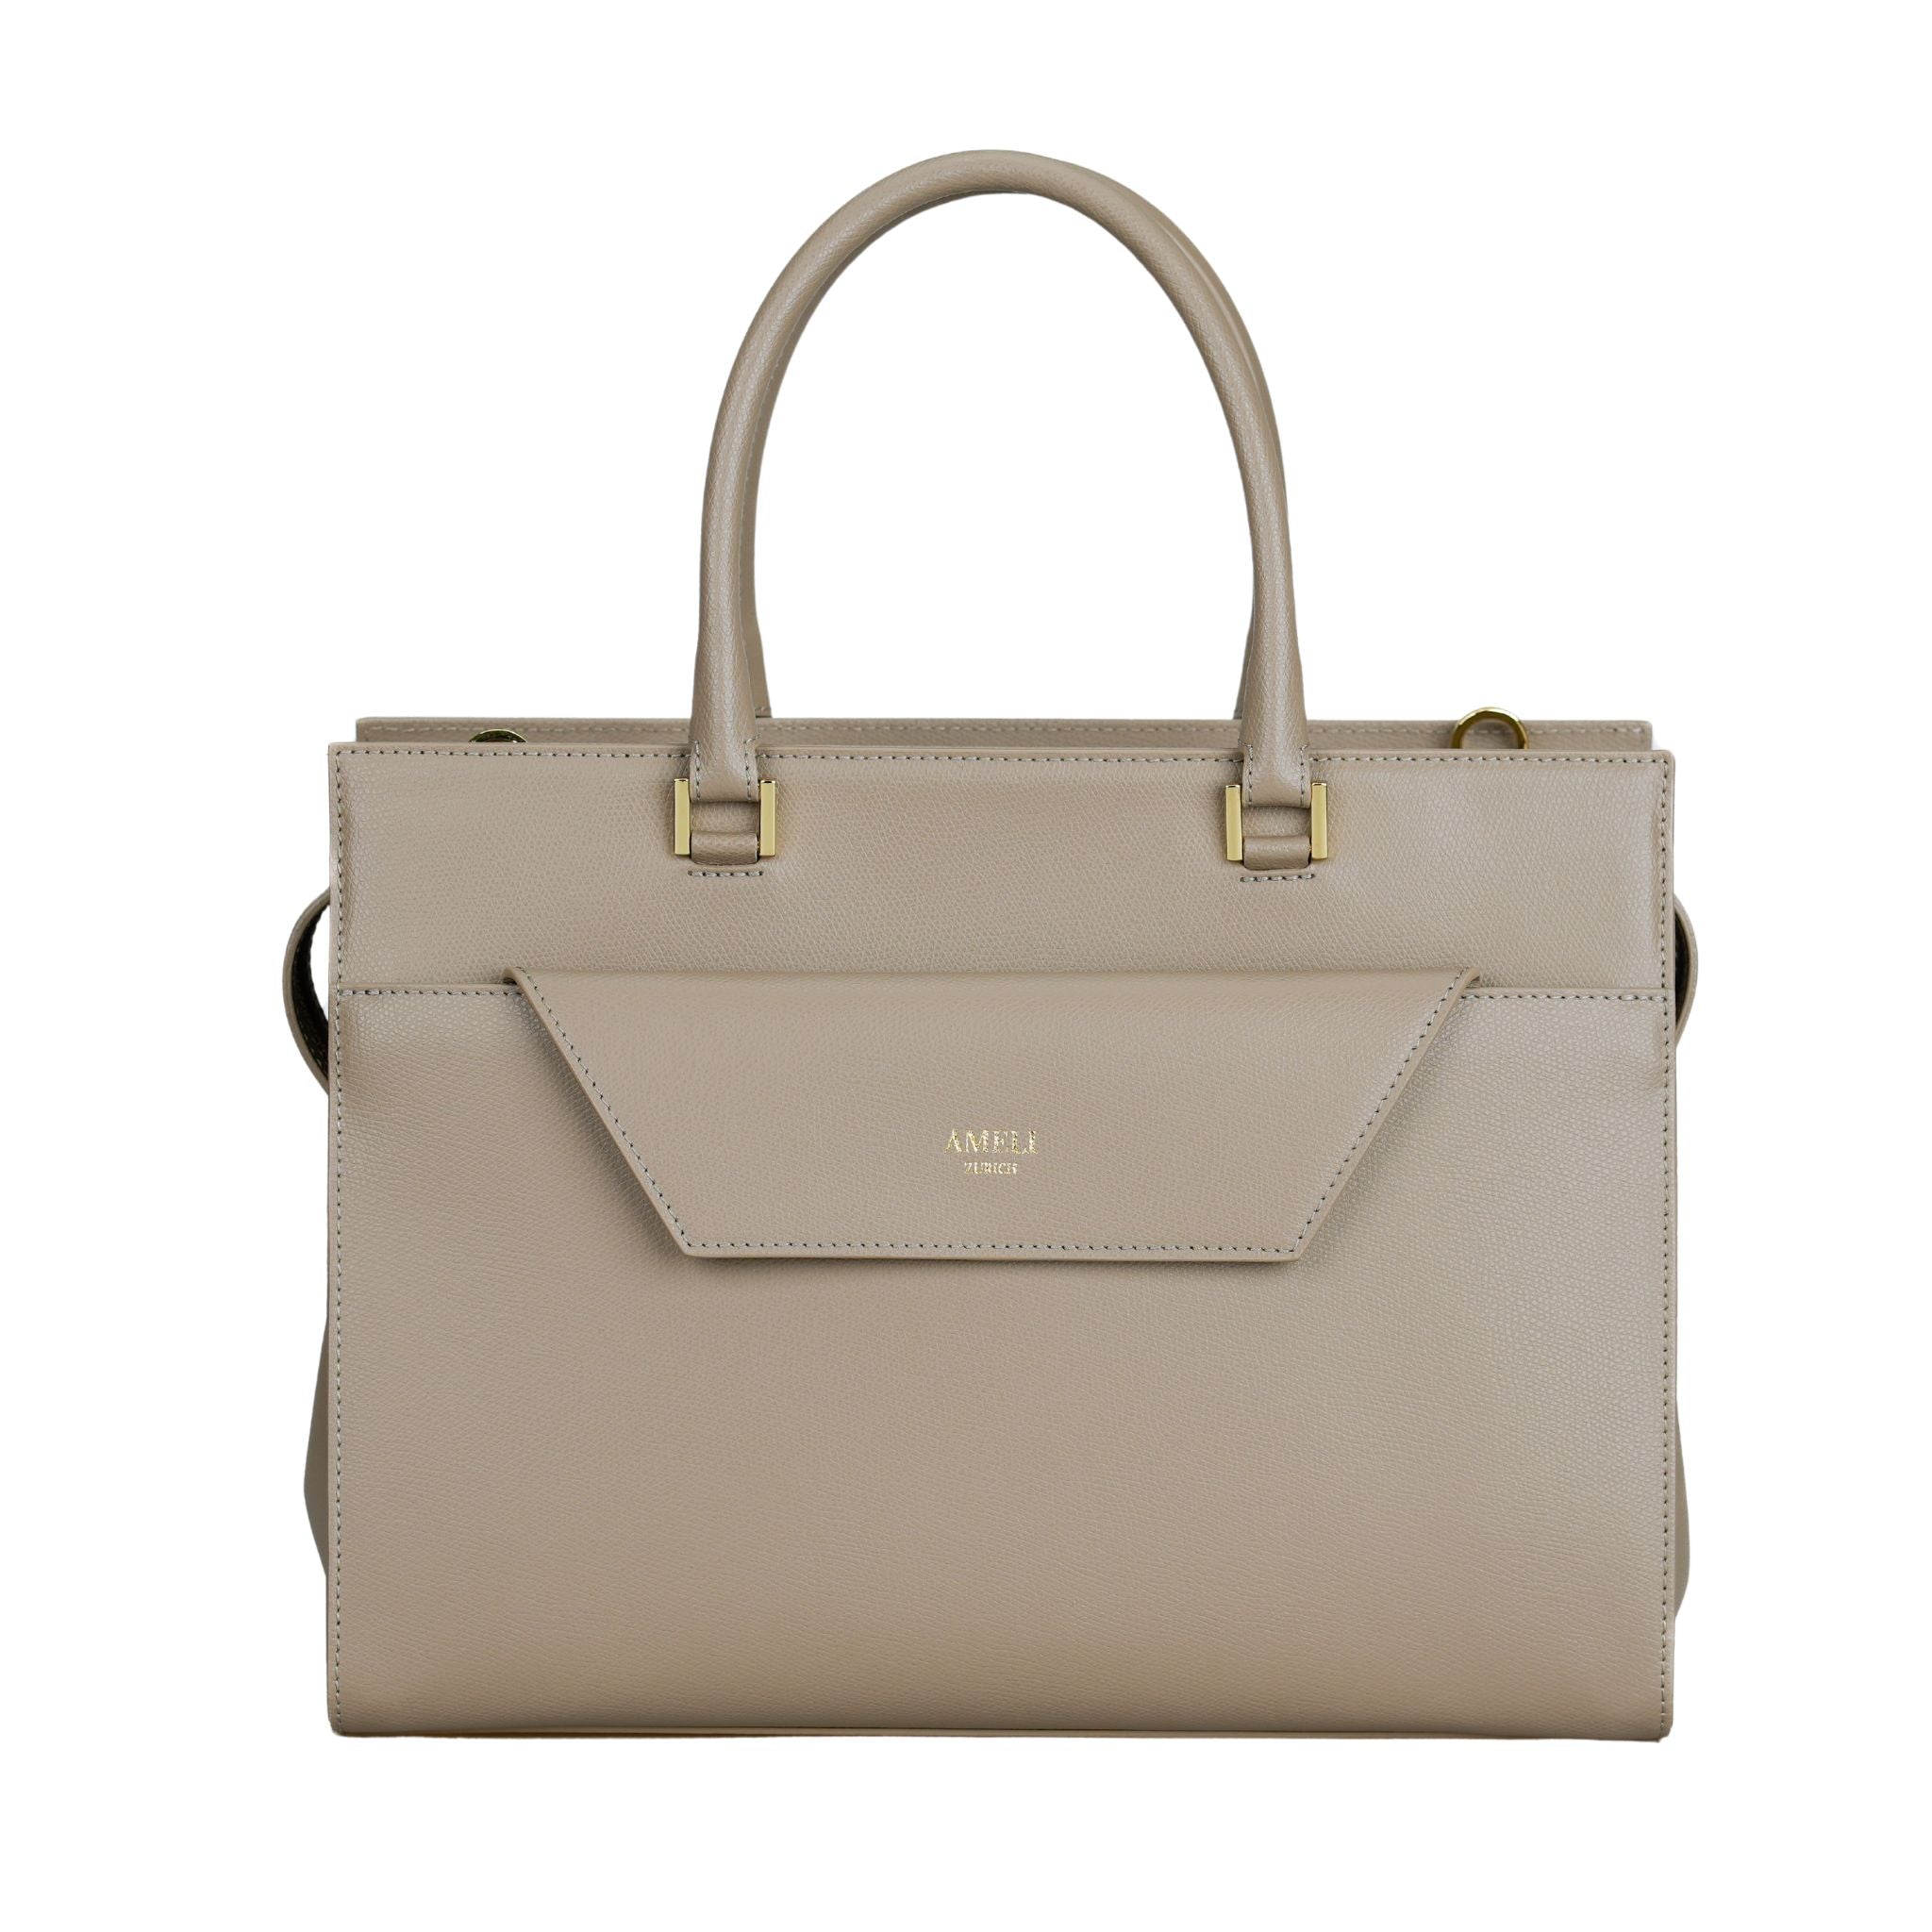 AMELI Zurich | CENTRAL | Cappuccino | Pebbled Leather | Front